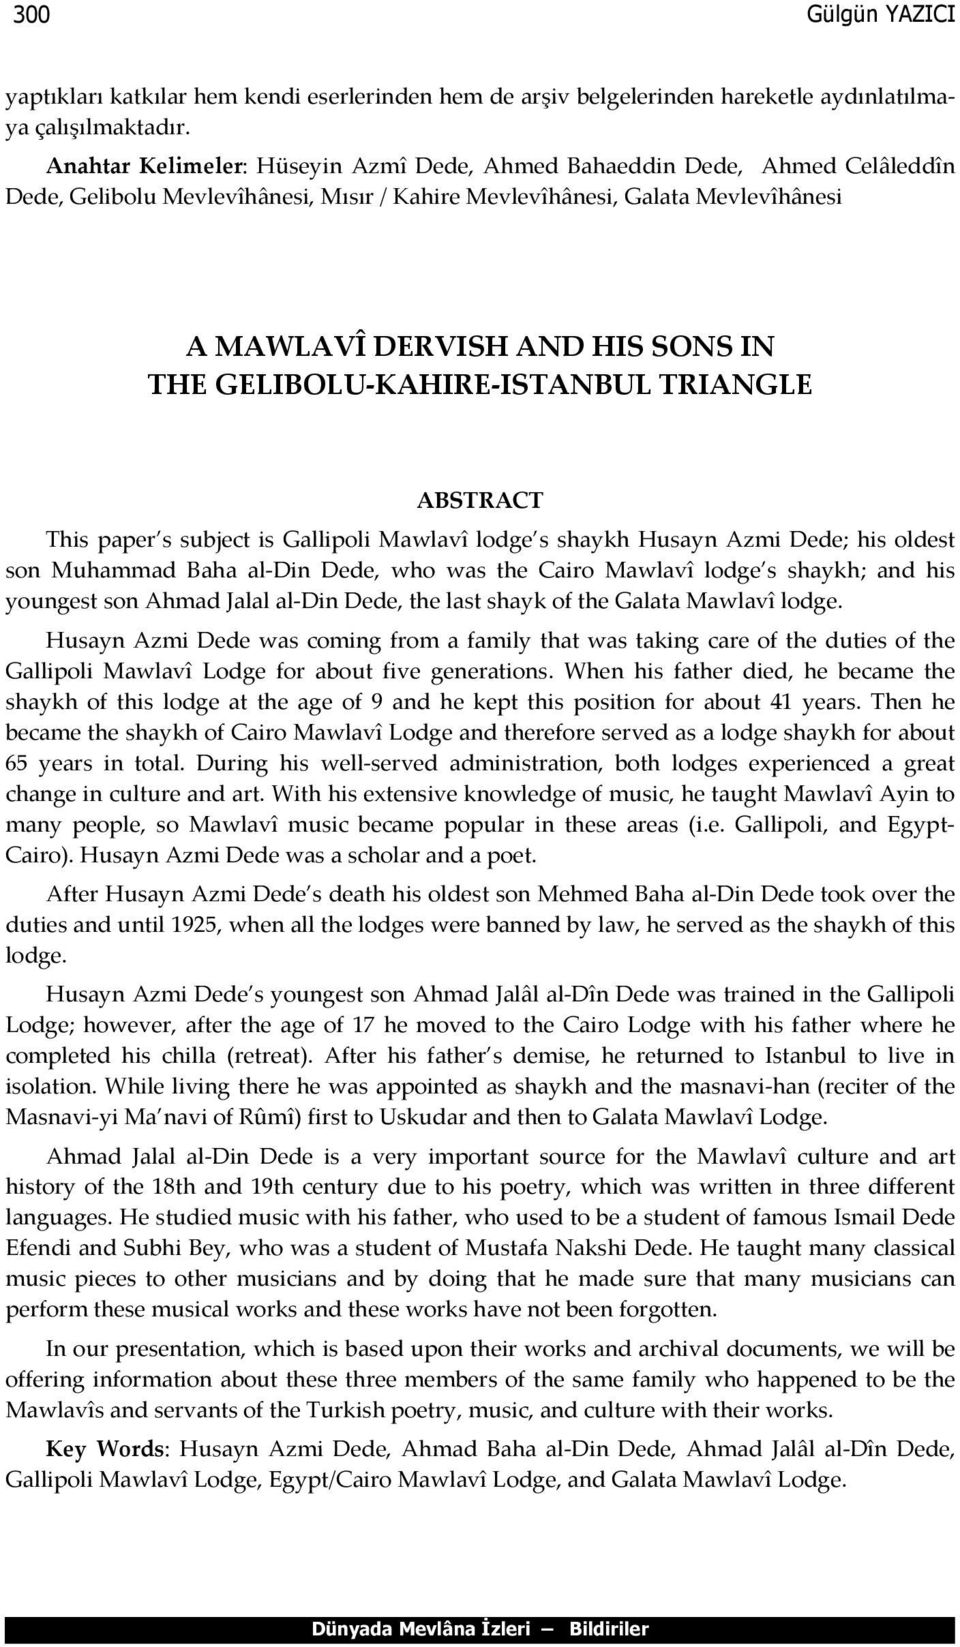 GELIBOLU KAHIRE ISTANBUL TRIANGLE ABSTRACT This paper s subject is Gallipoli Mawlavî lodge s shaykh Husayn Azmi Dede; his oldest son Muhammad Baha al-din Dede, who was the Cairo Mawlavî lodge s